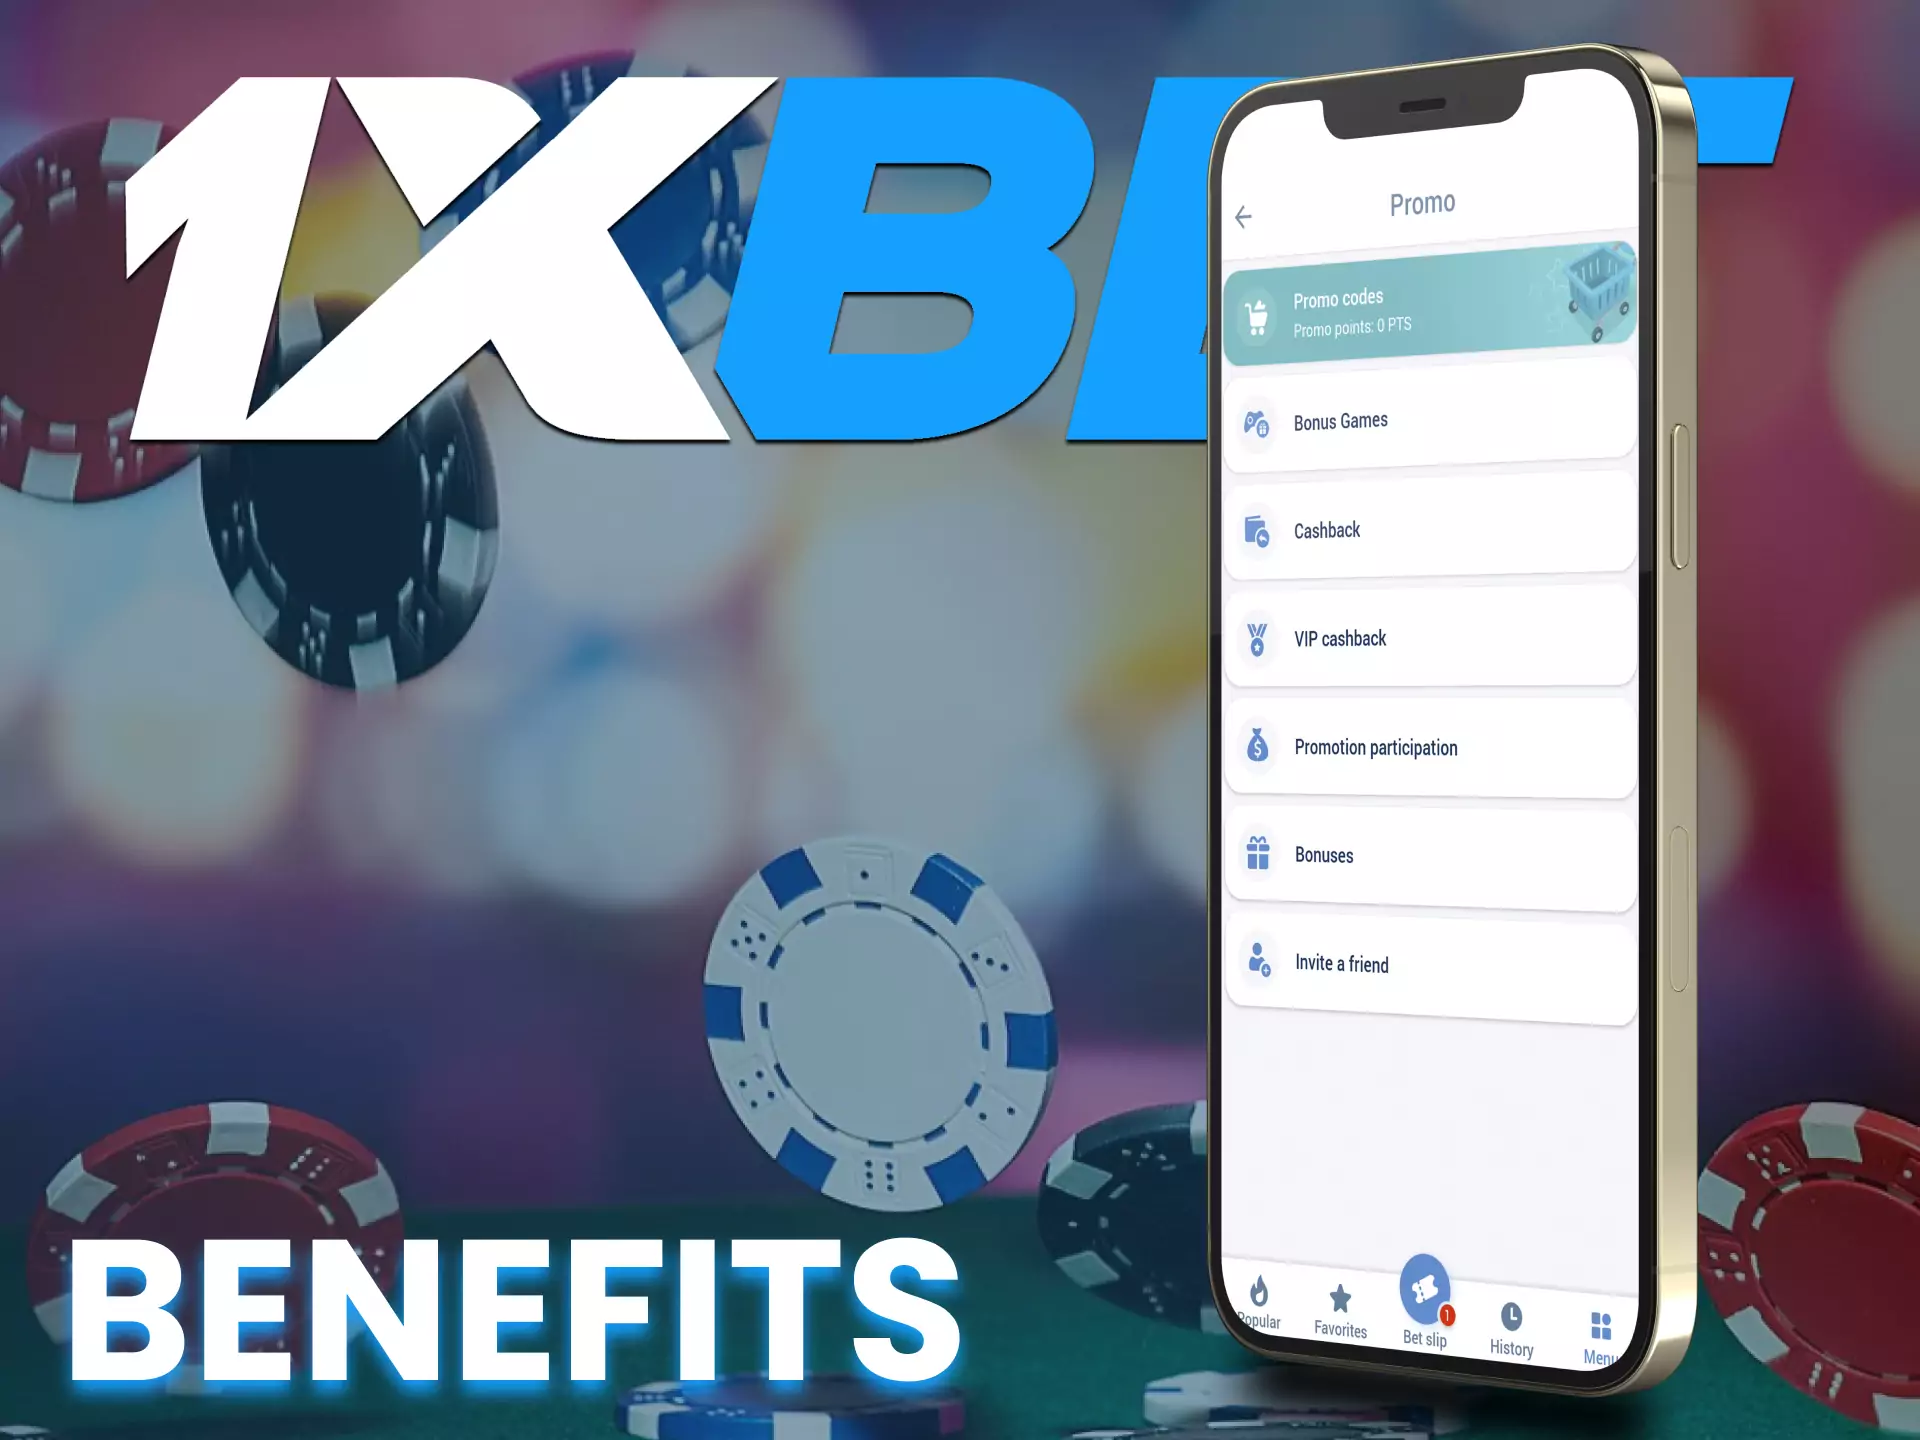 1xBet offers its players a lot of bonuses and advantages.